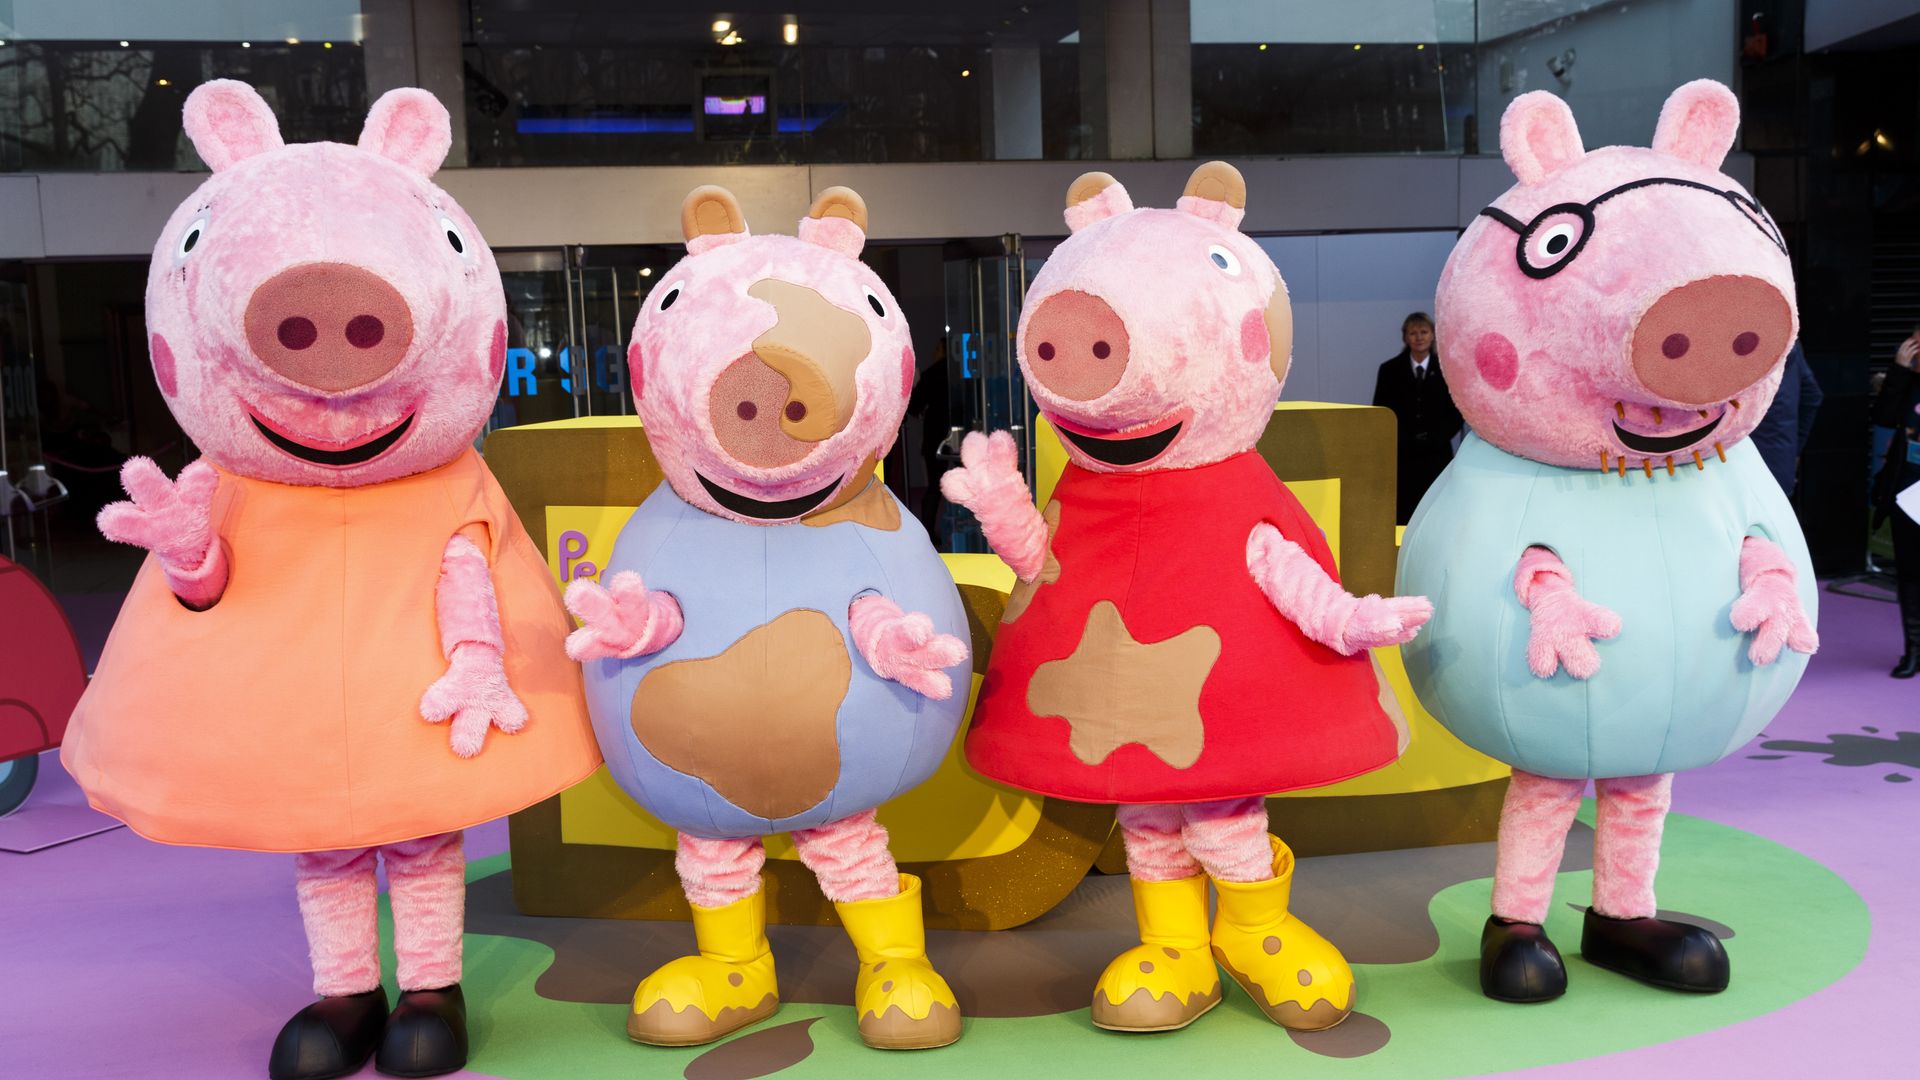 Peppa the Pig cartoon with her family